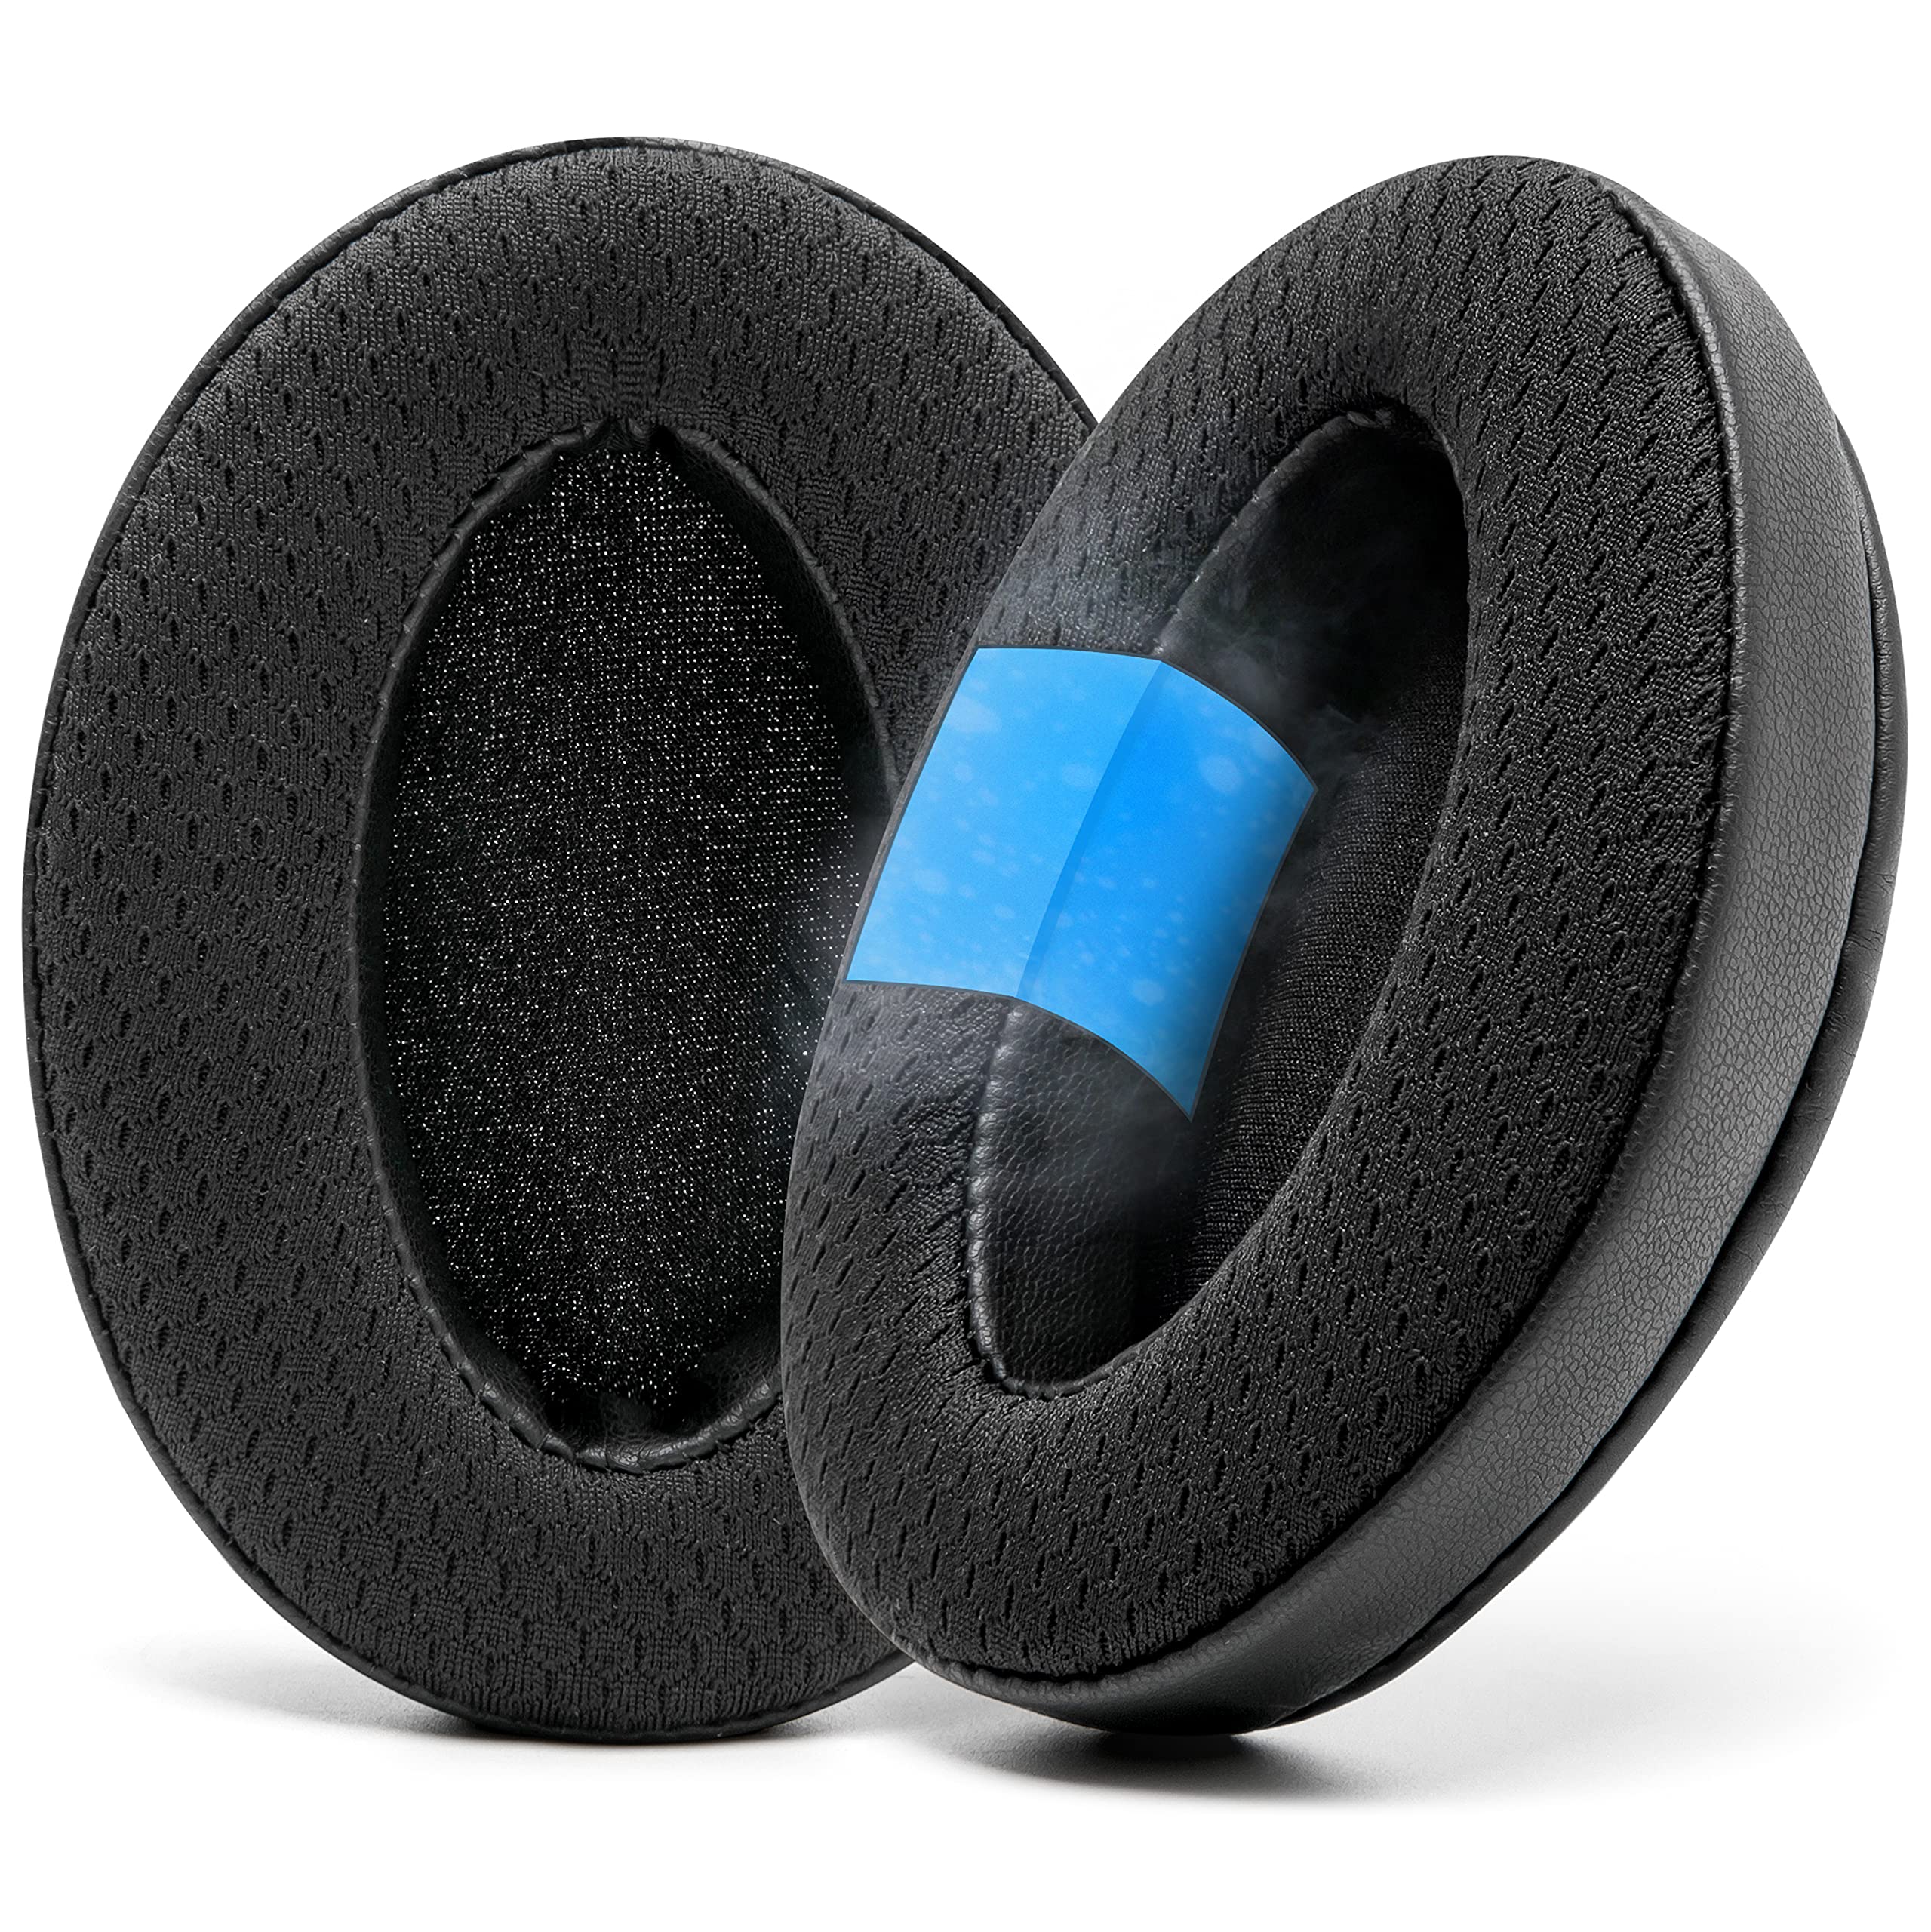 WC Freeze Cooling Gel Earpads - Compatible with HyperX Cloud, Steelseries Arctis, ATH M50X, G Pro X & More - Major Comfort Upgra